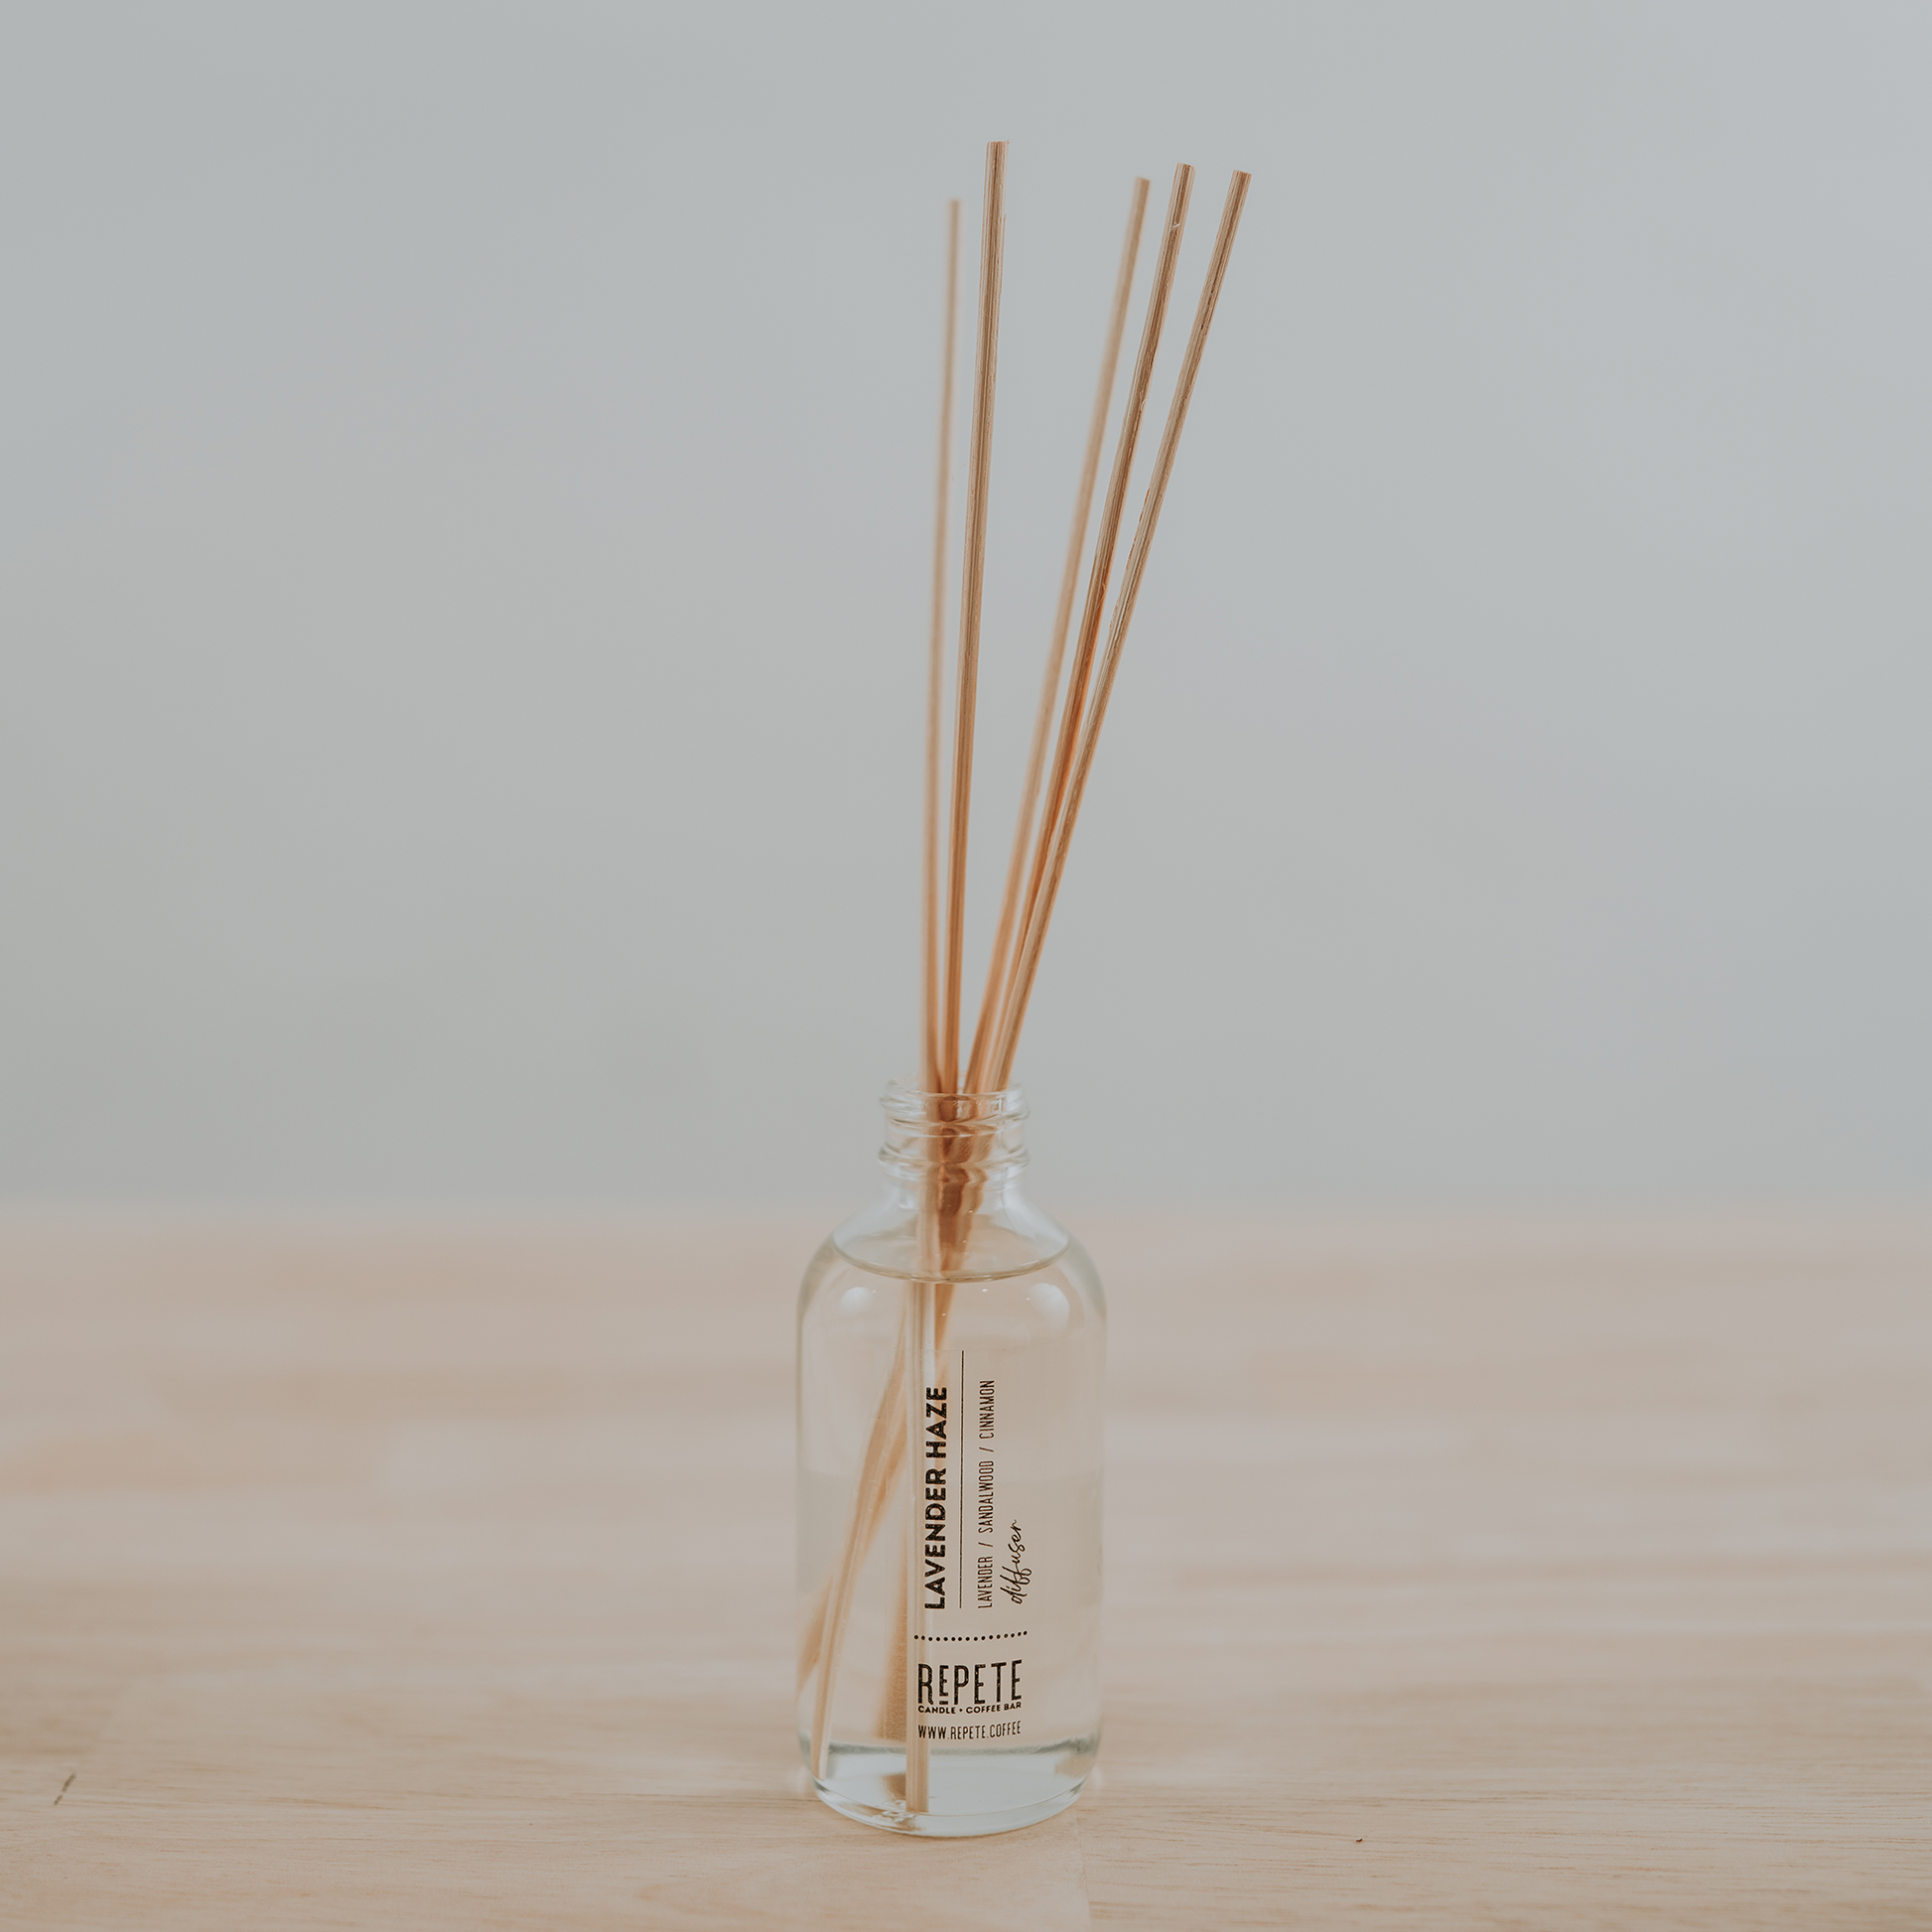 Lavender Haze diffuser from Repete Candle and Coffee Bar